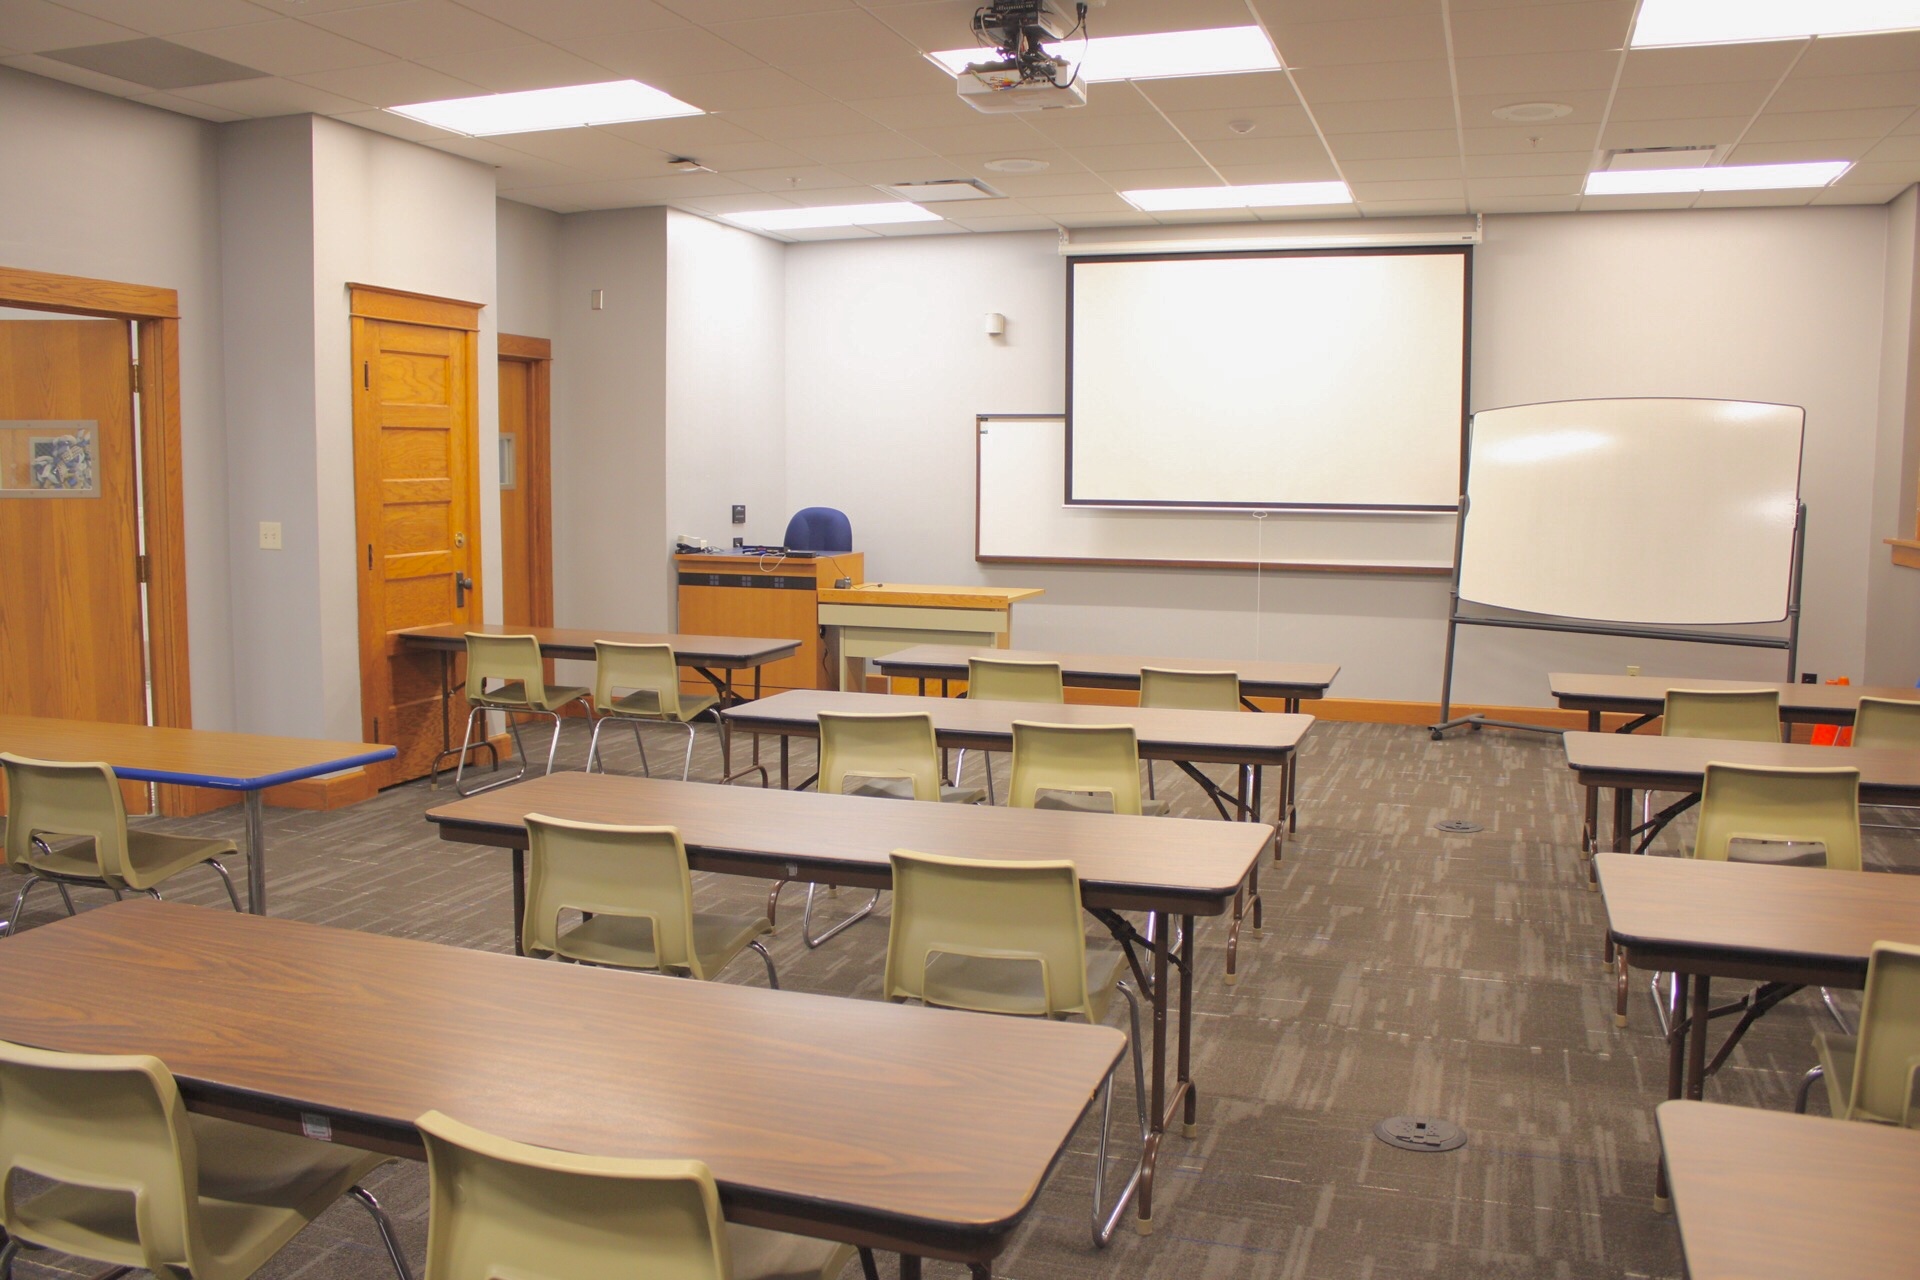 TJ Majors 301 has tables, chairs, a wall mounted white board, a movable white board, a ceiling mounted projector and a ceiling mounted projection screen.